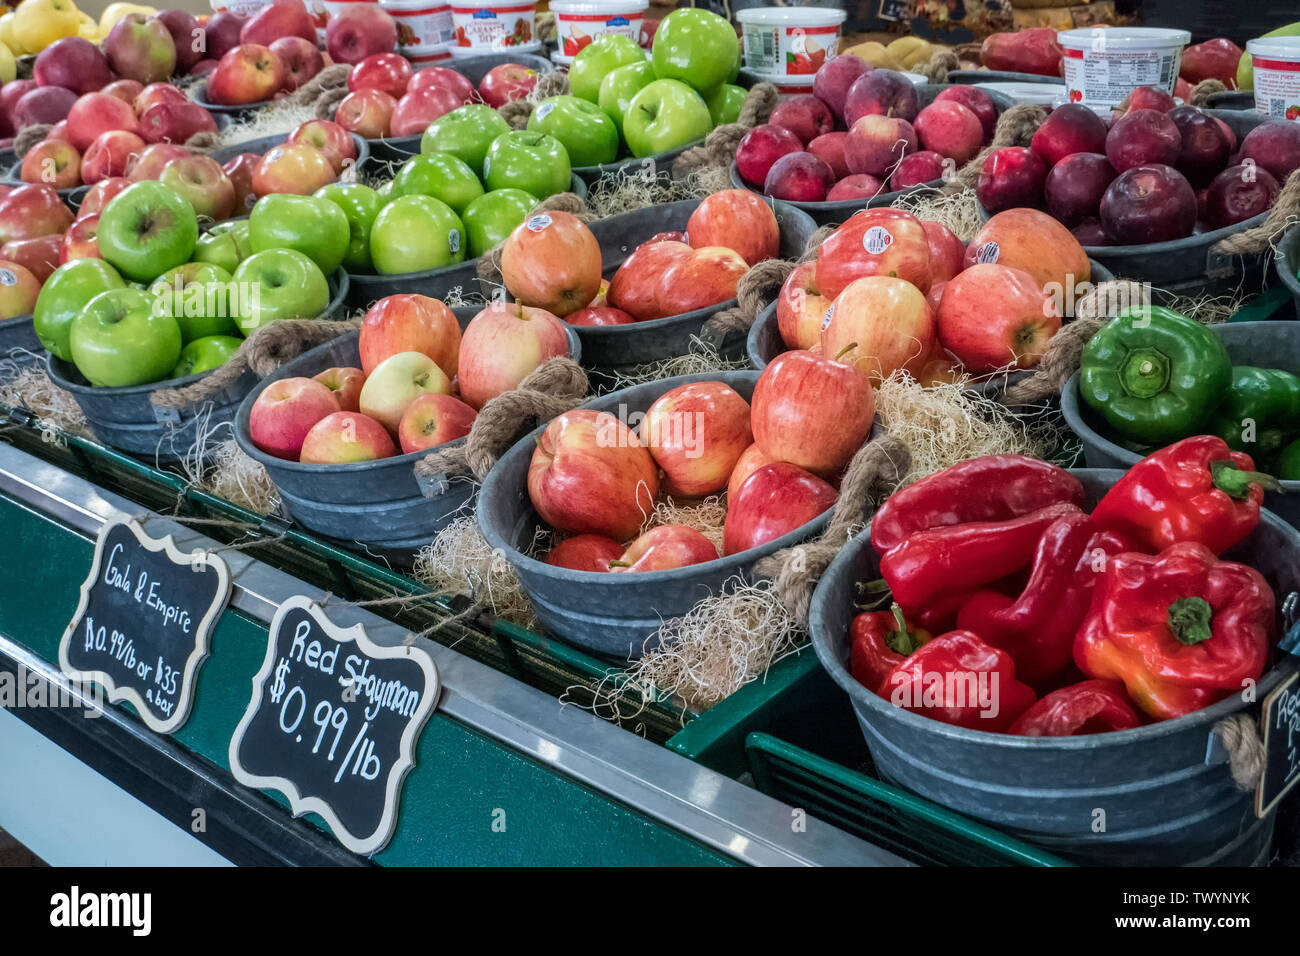 Wenatchee, Washington, USA.  Refrigerated display case of freshly harvested locally grown apples for sale at a produce stand. Stock Photo